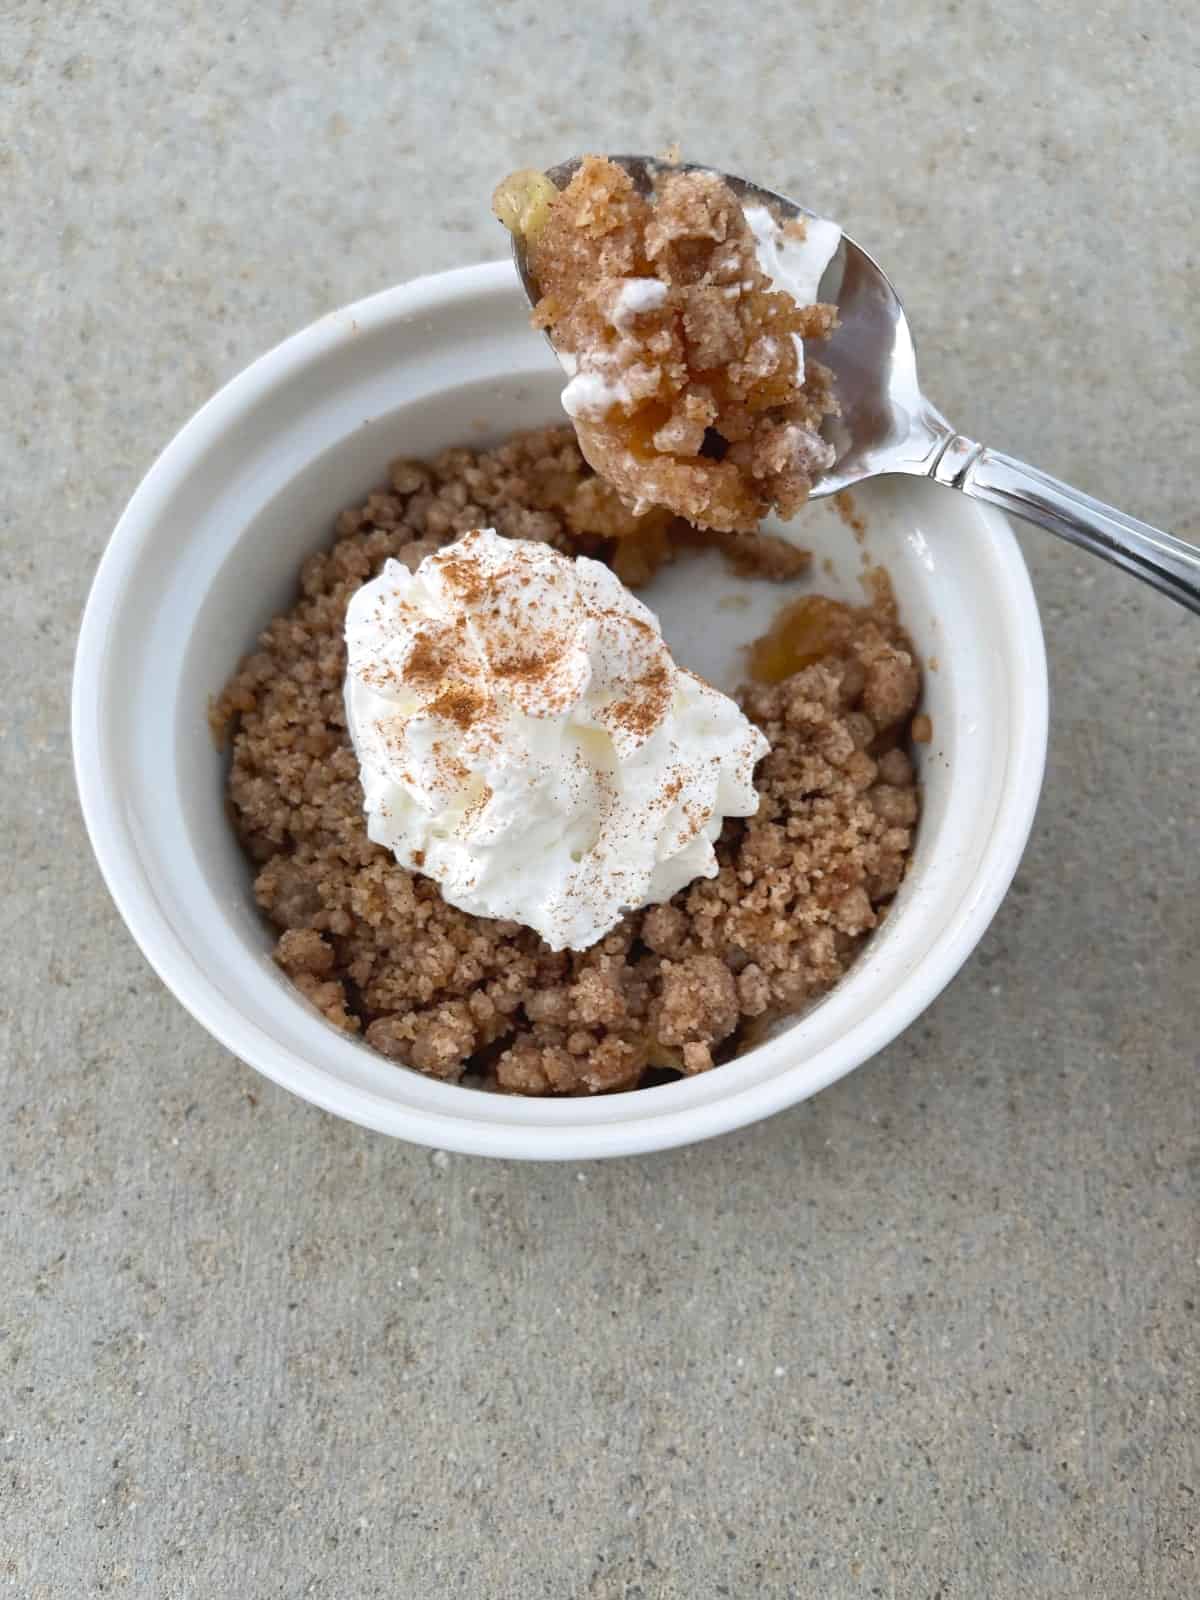 Microwave apple crisp in white ramekin with whipped topping and cinnamon sprinkle.